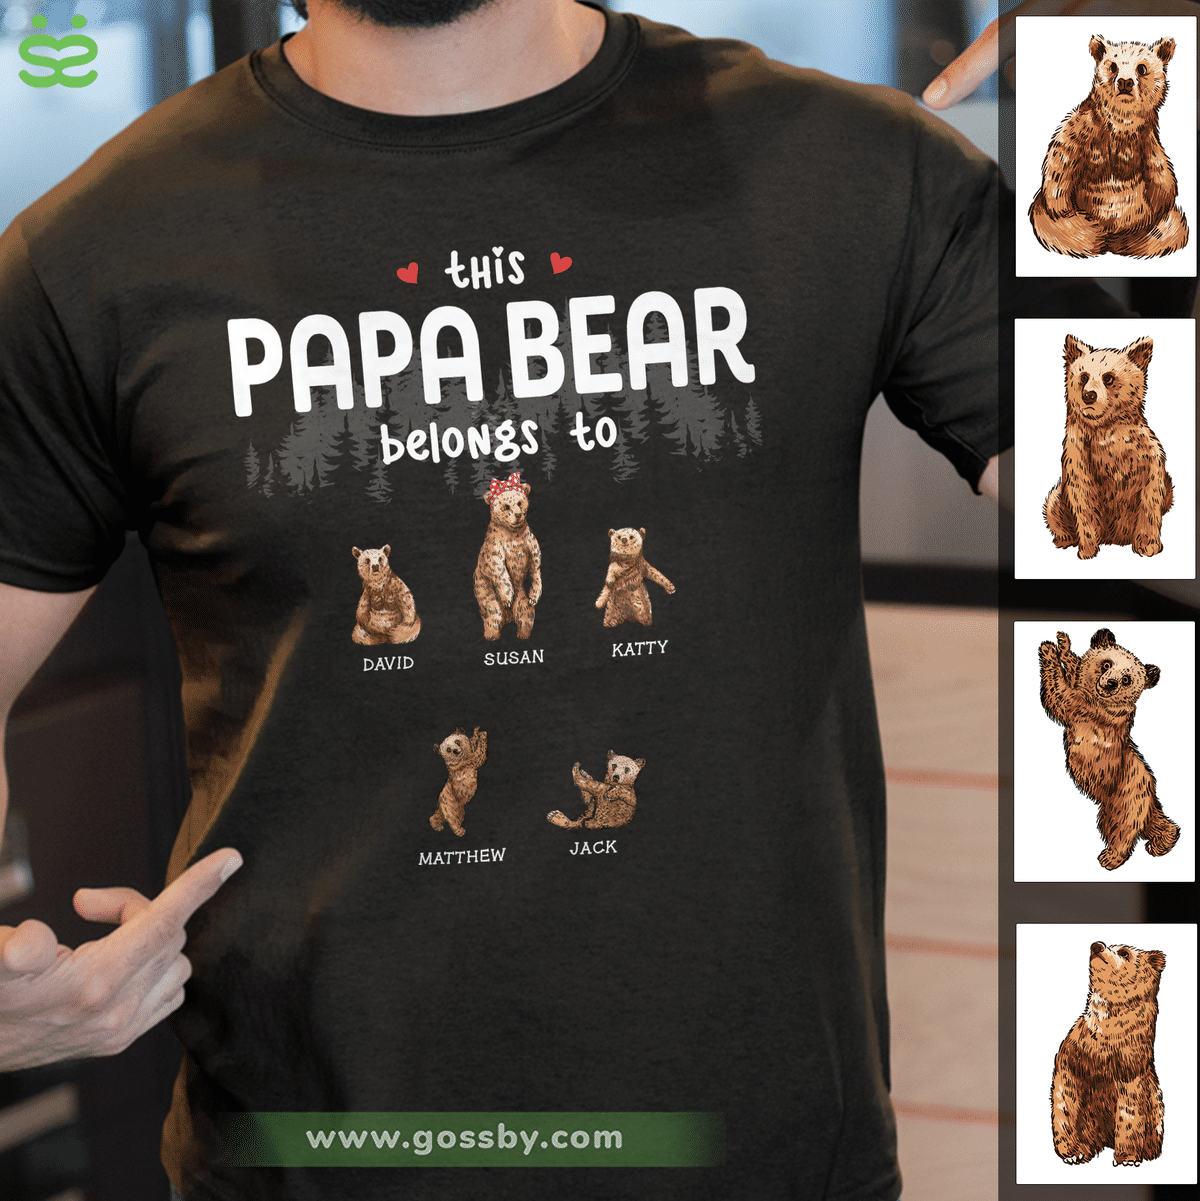 Papa Bear' T-Shirt - Great gift for Fathers everywhere! - Don't Feed the  Bears